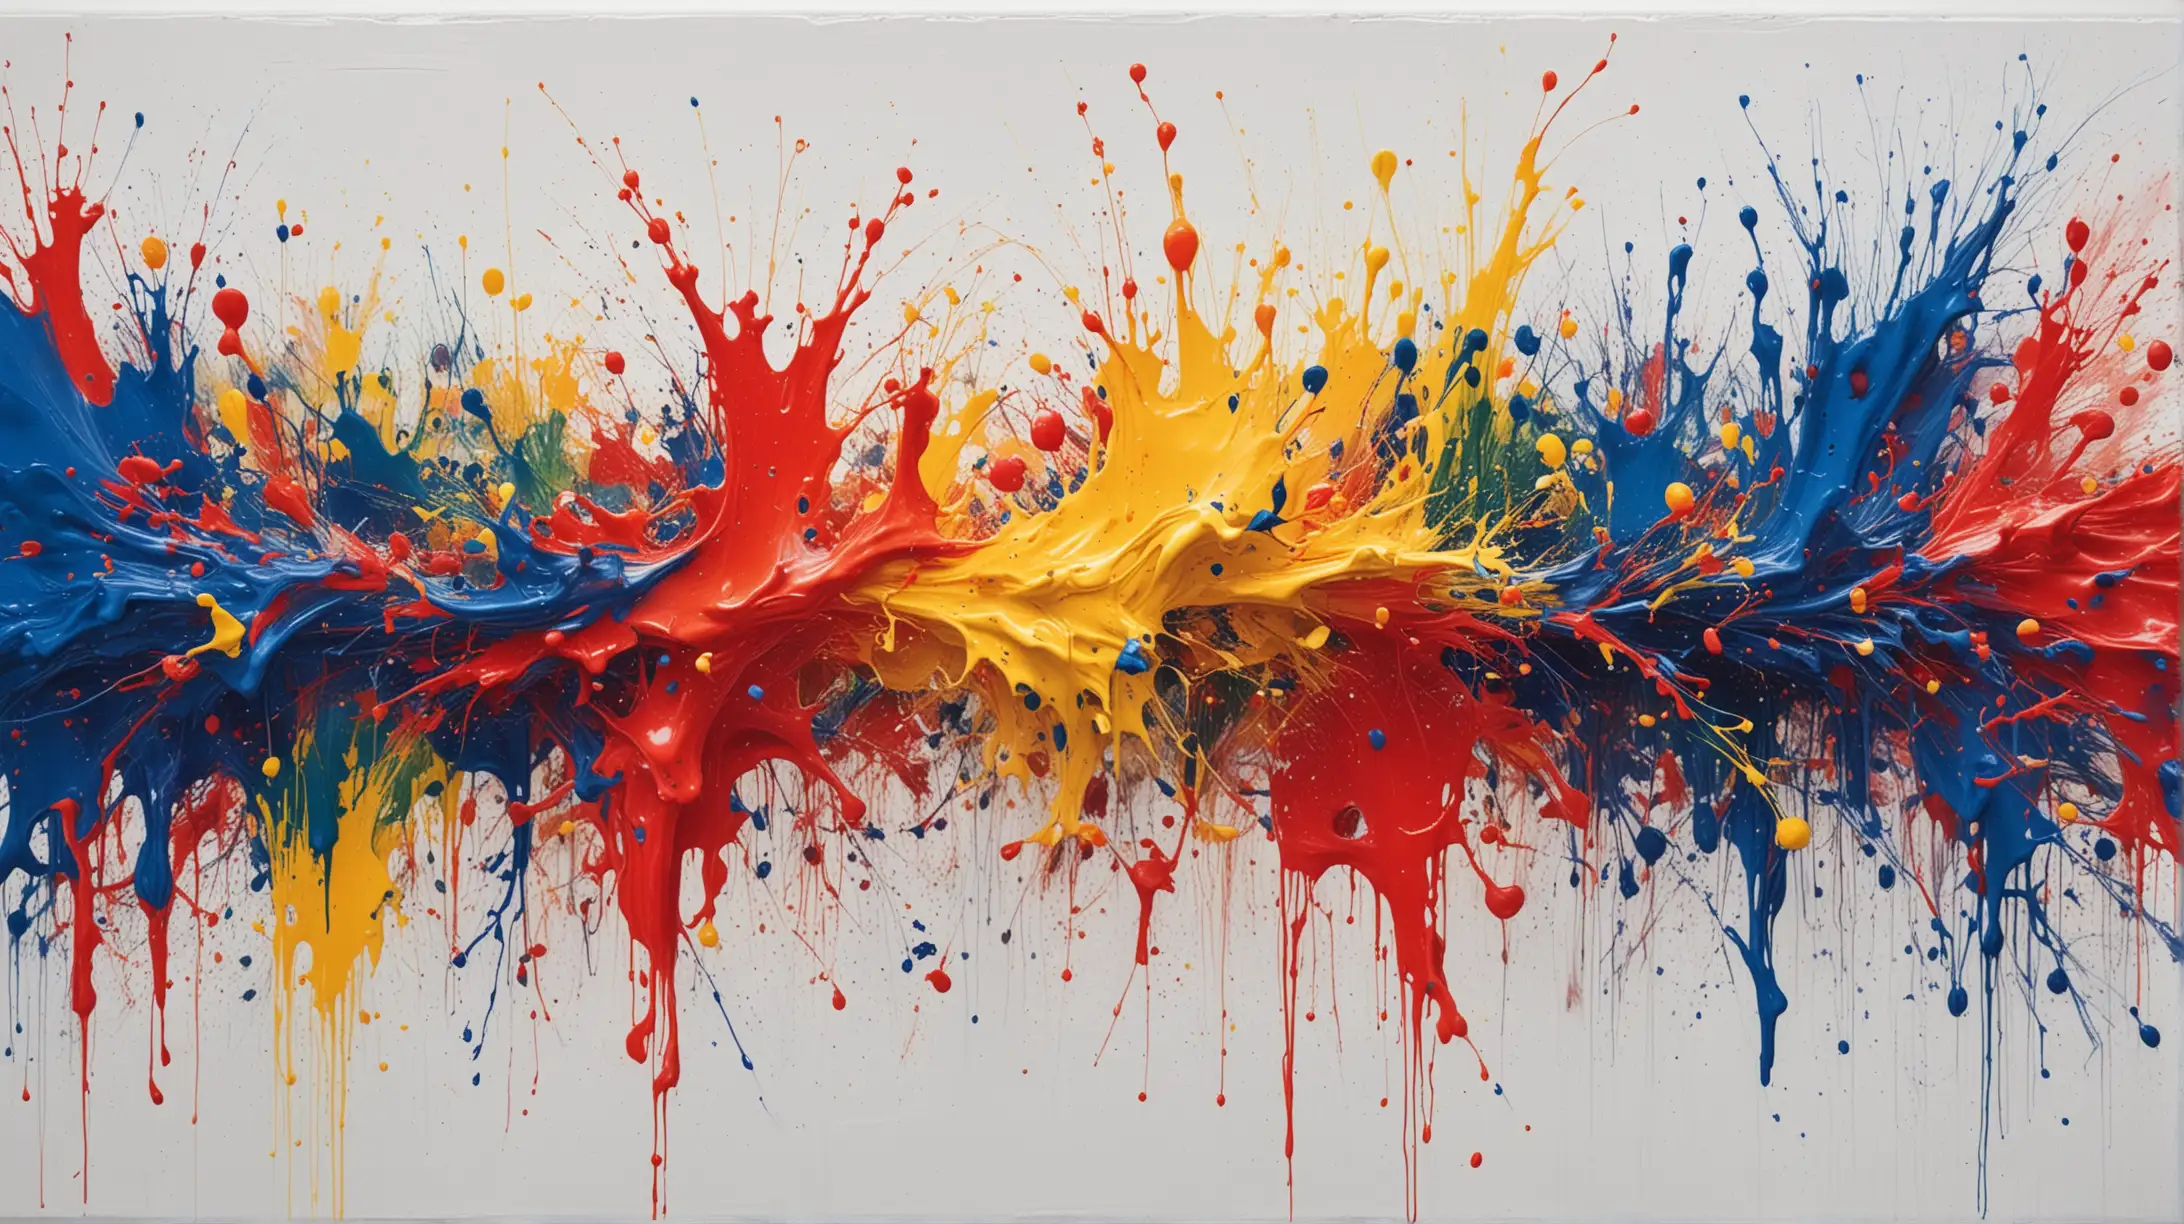 abstract splashes of primary colors of paint on a white surface in the style of gerhard richter
